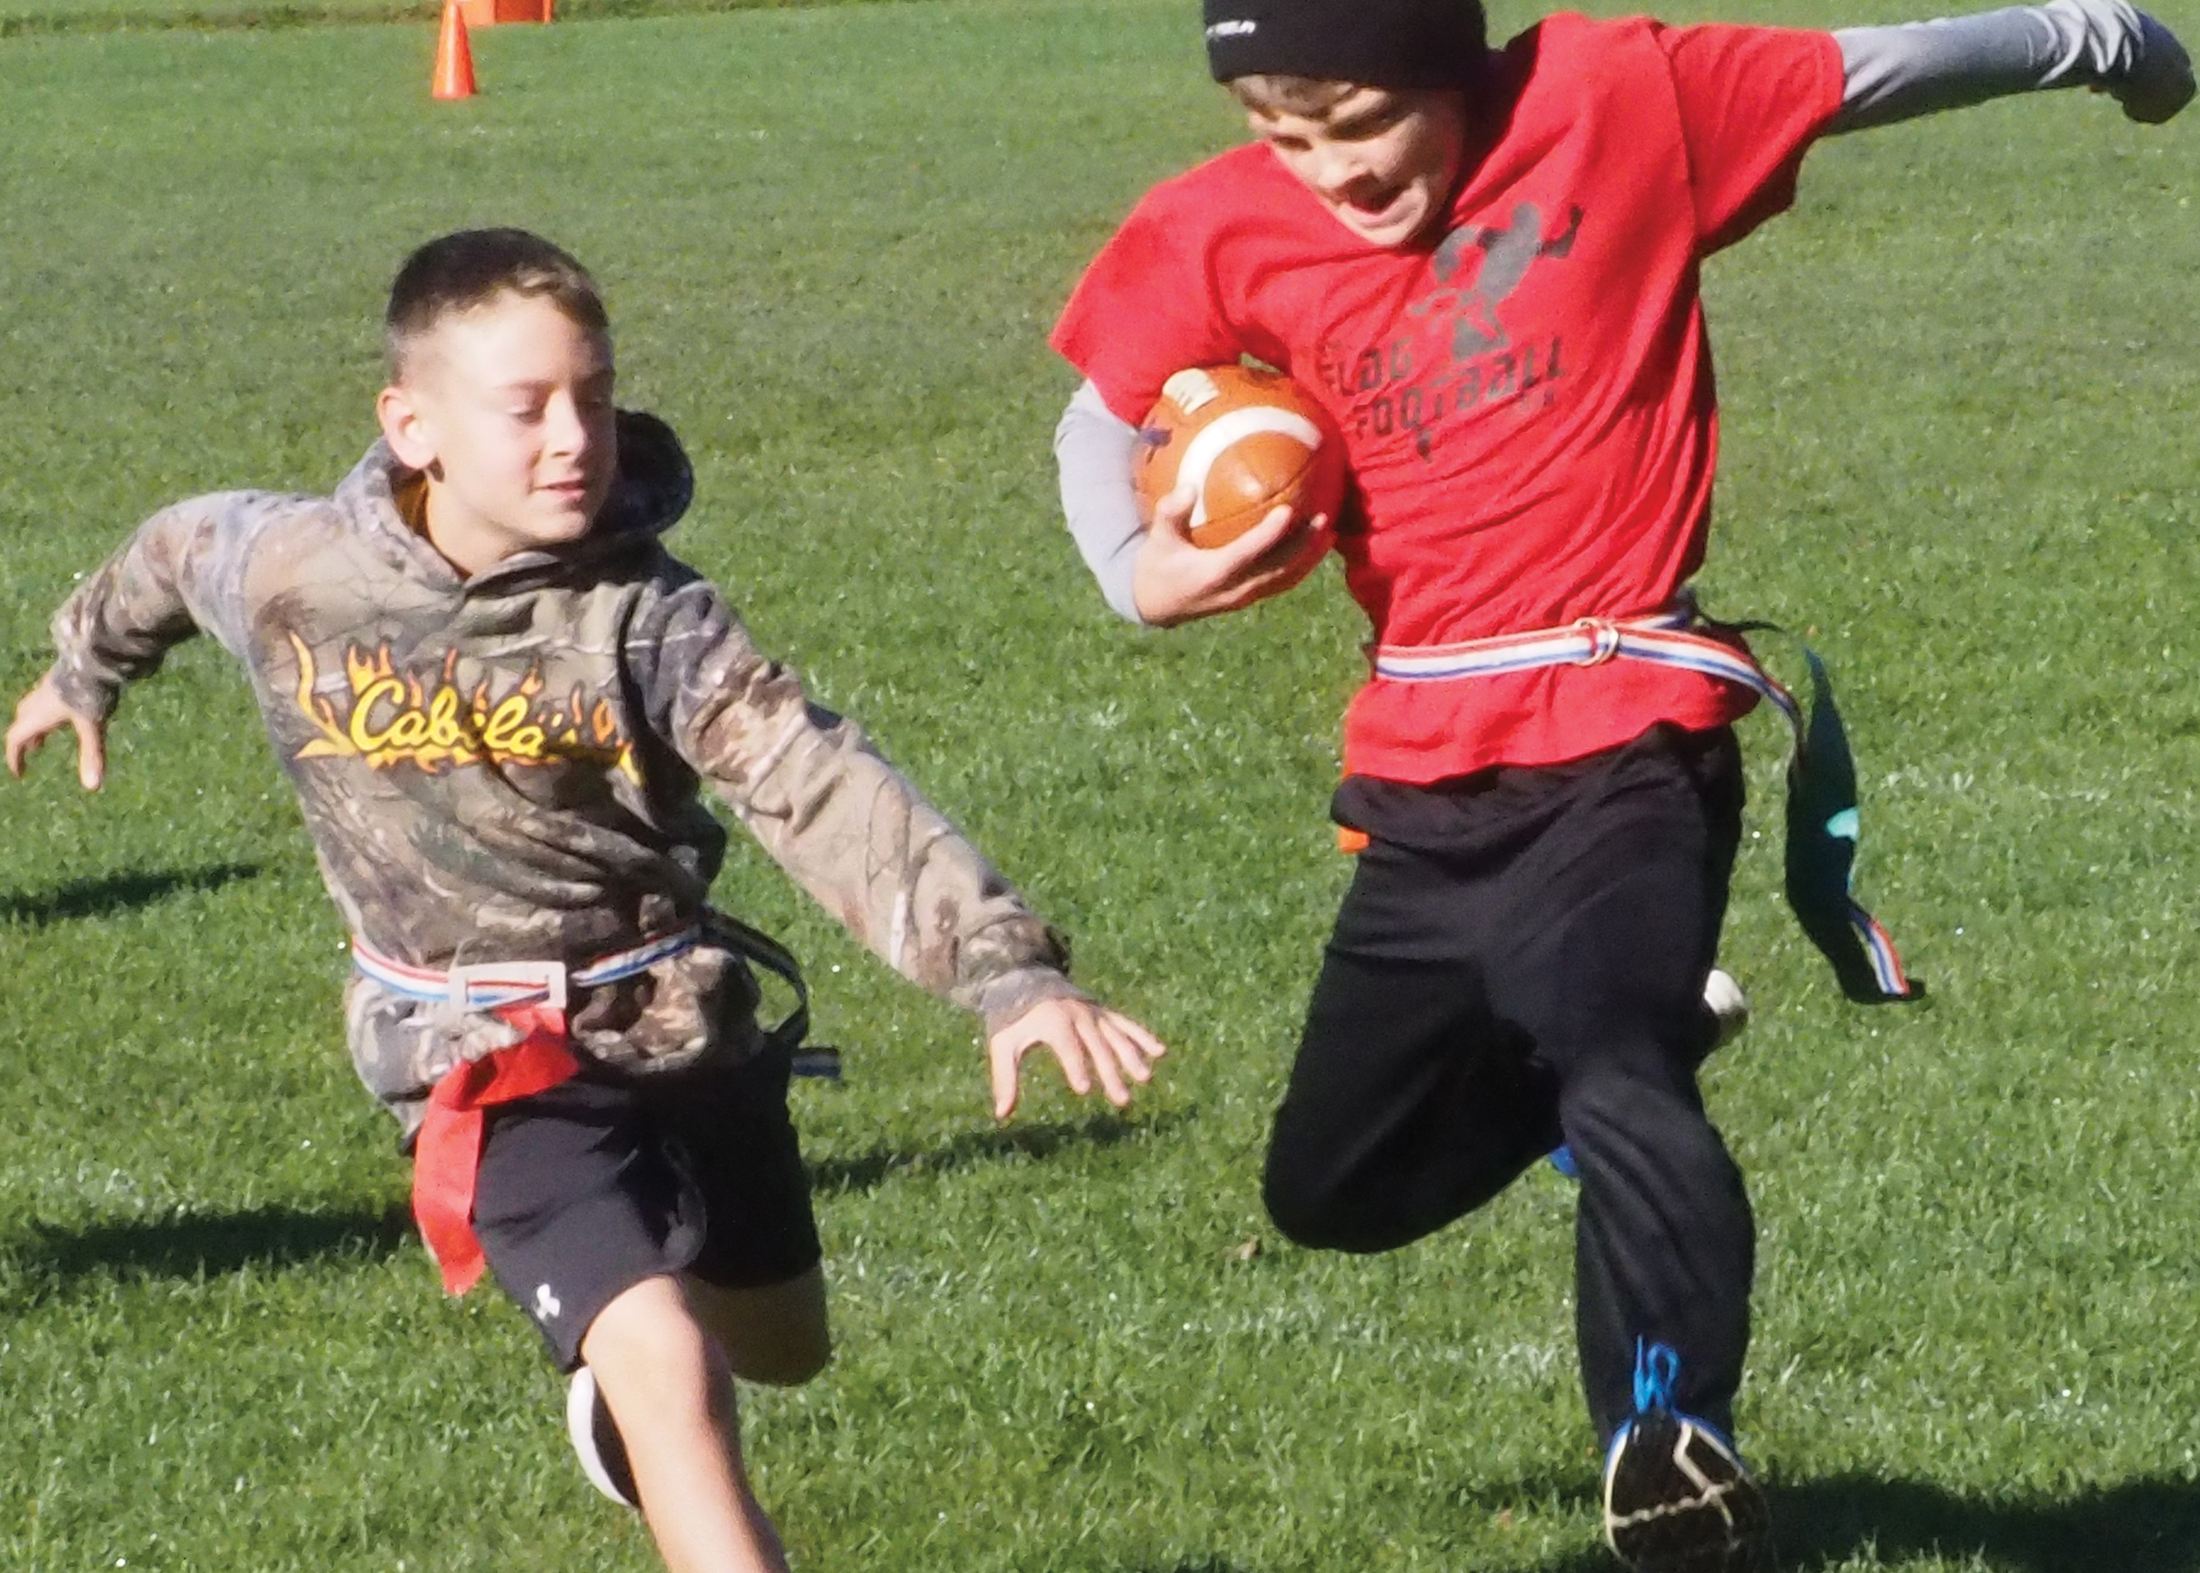 Flags on every play in YMCA Youth Football League